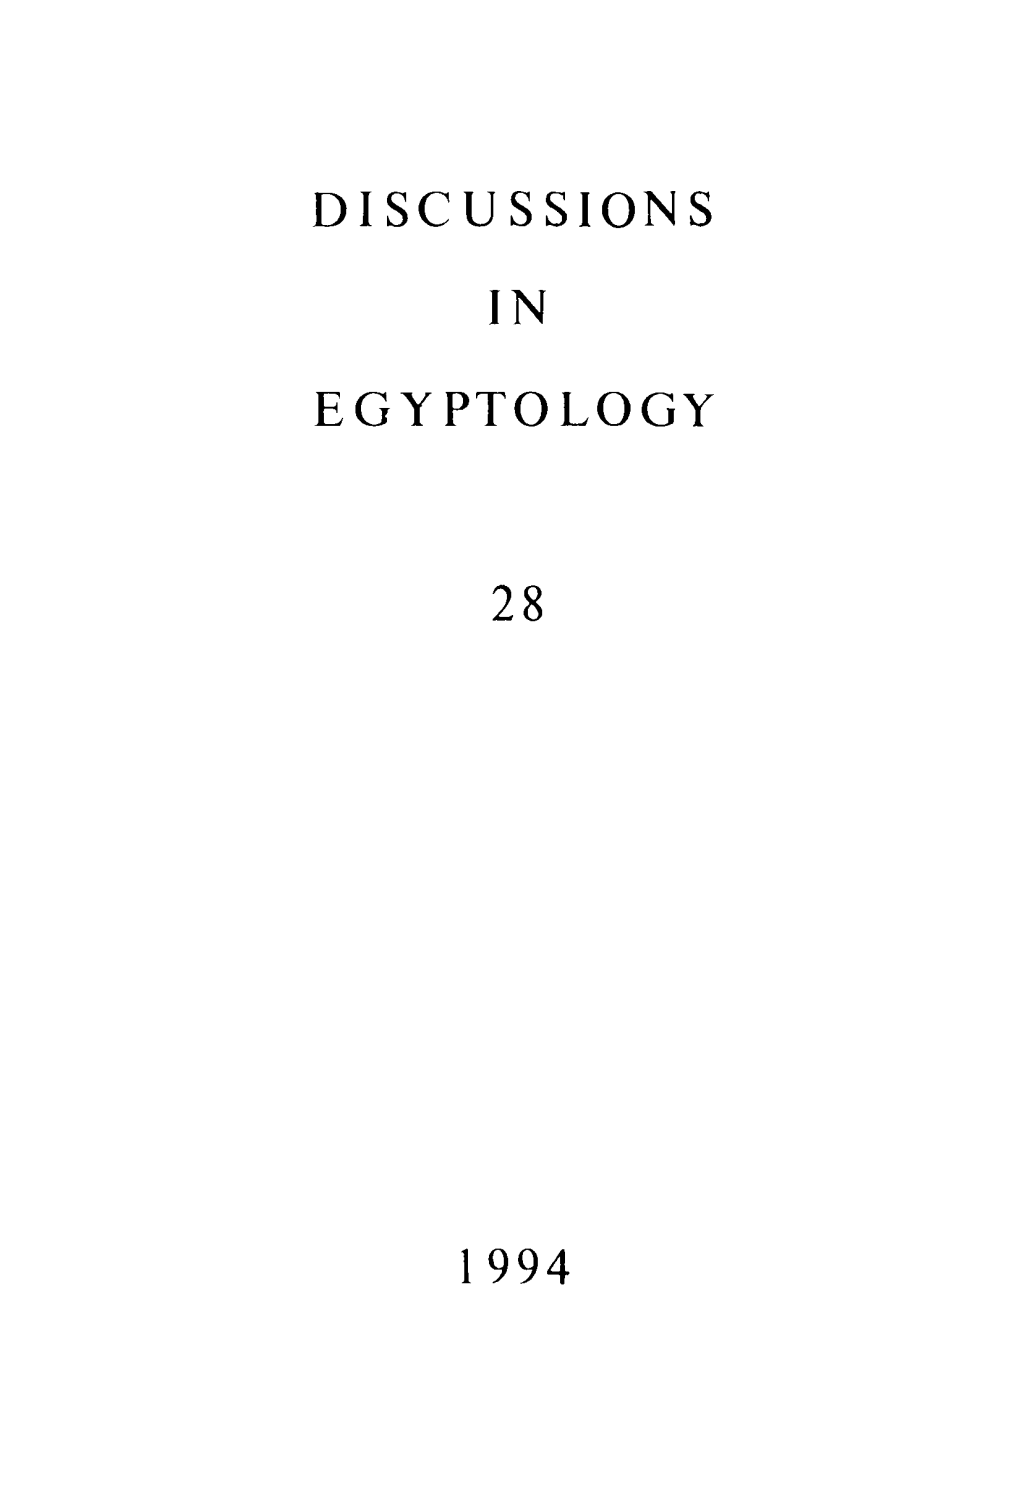 Discussions in Egyptology 28, 1994